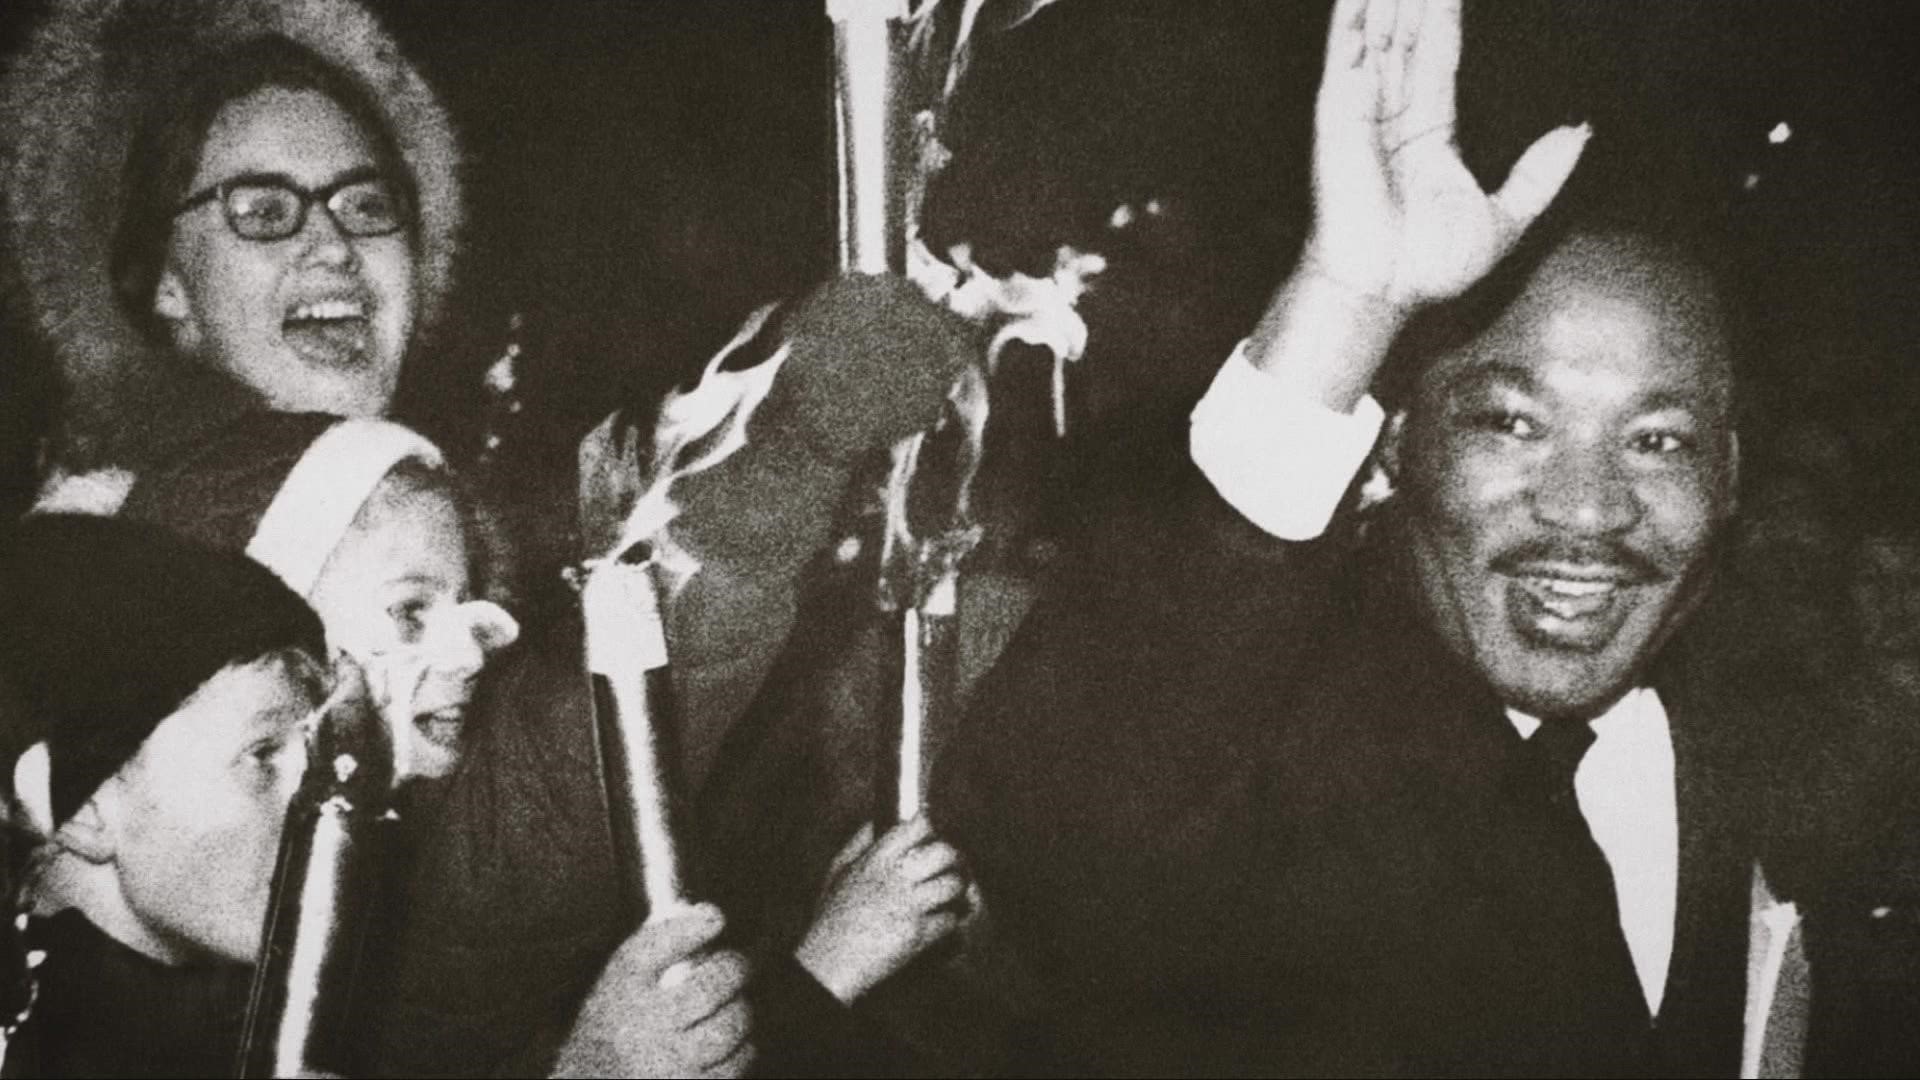 The call to register black voters brought Dr. King to Cleveland. And a young intern was there to document the visit.